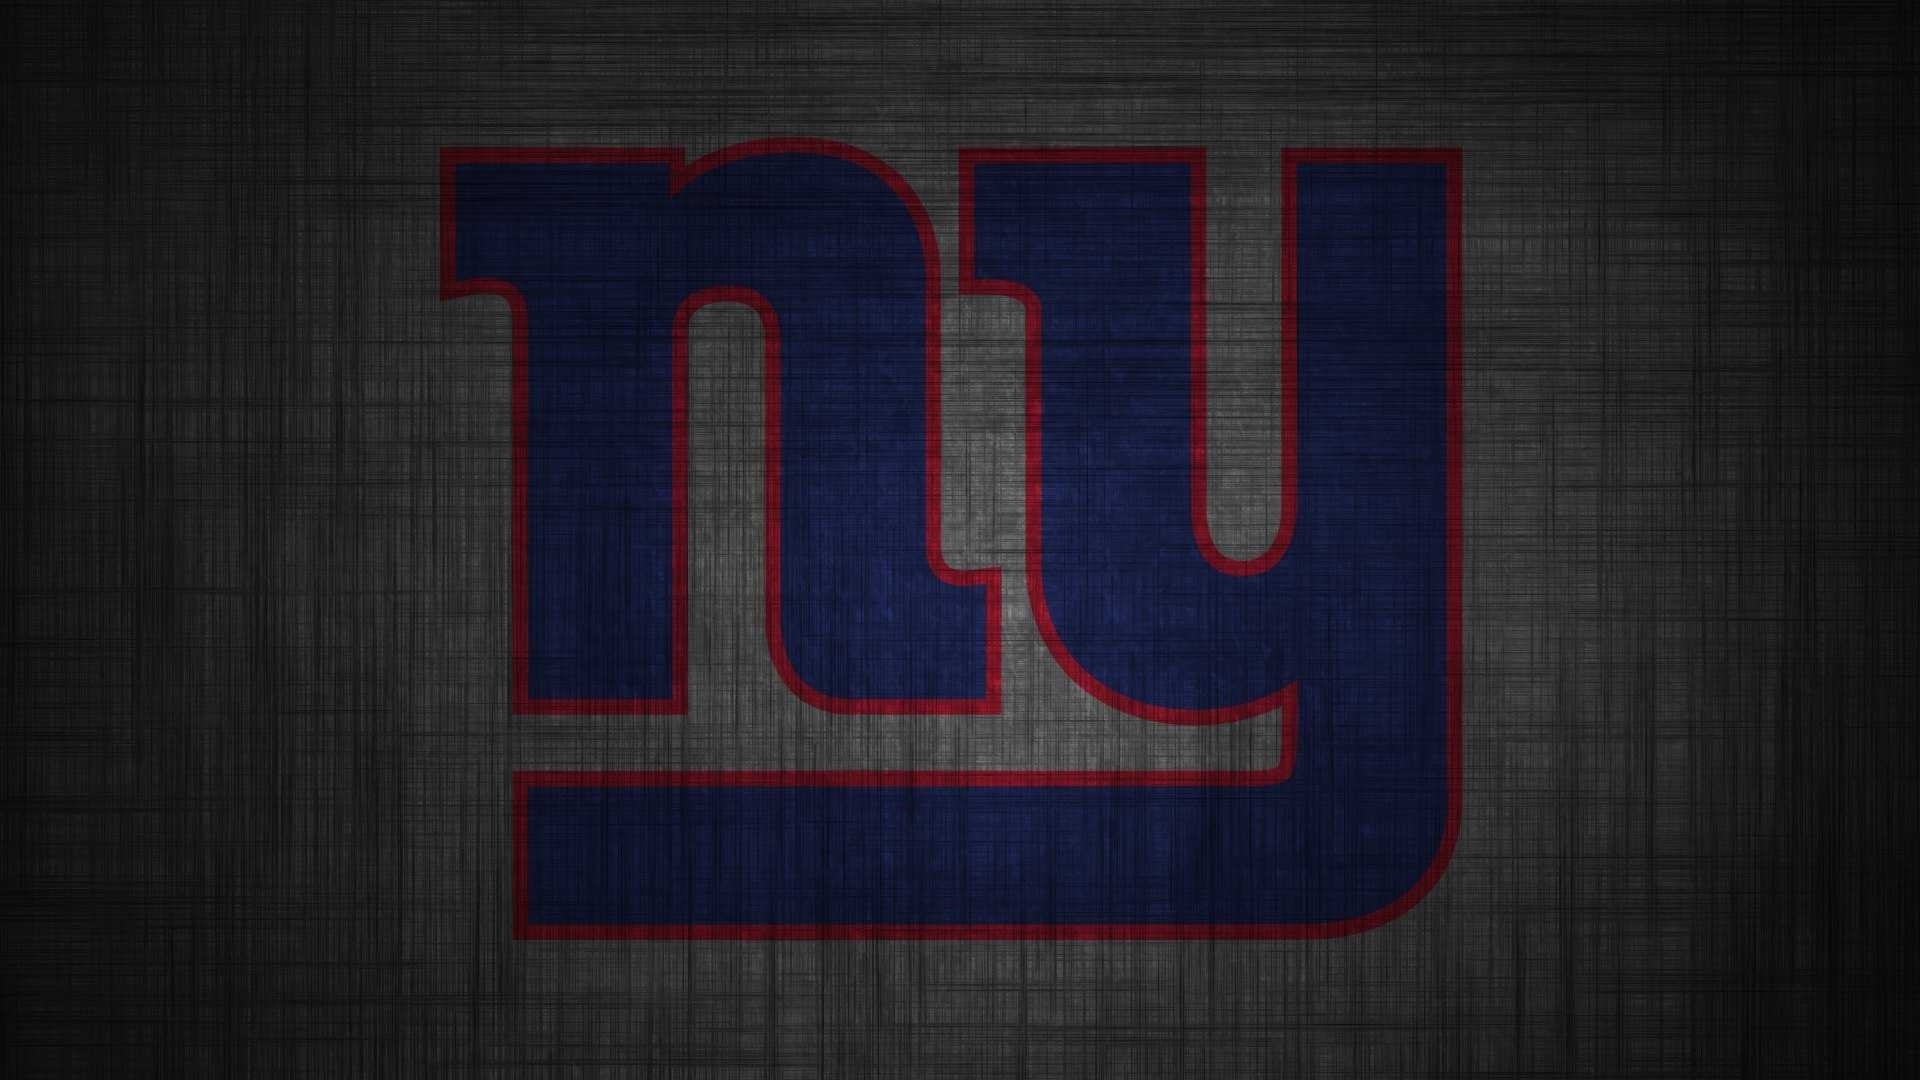 ny giants wallpaper full hd computer for smartphone new york